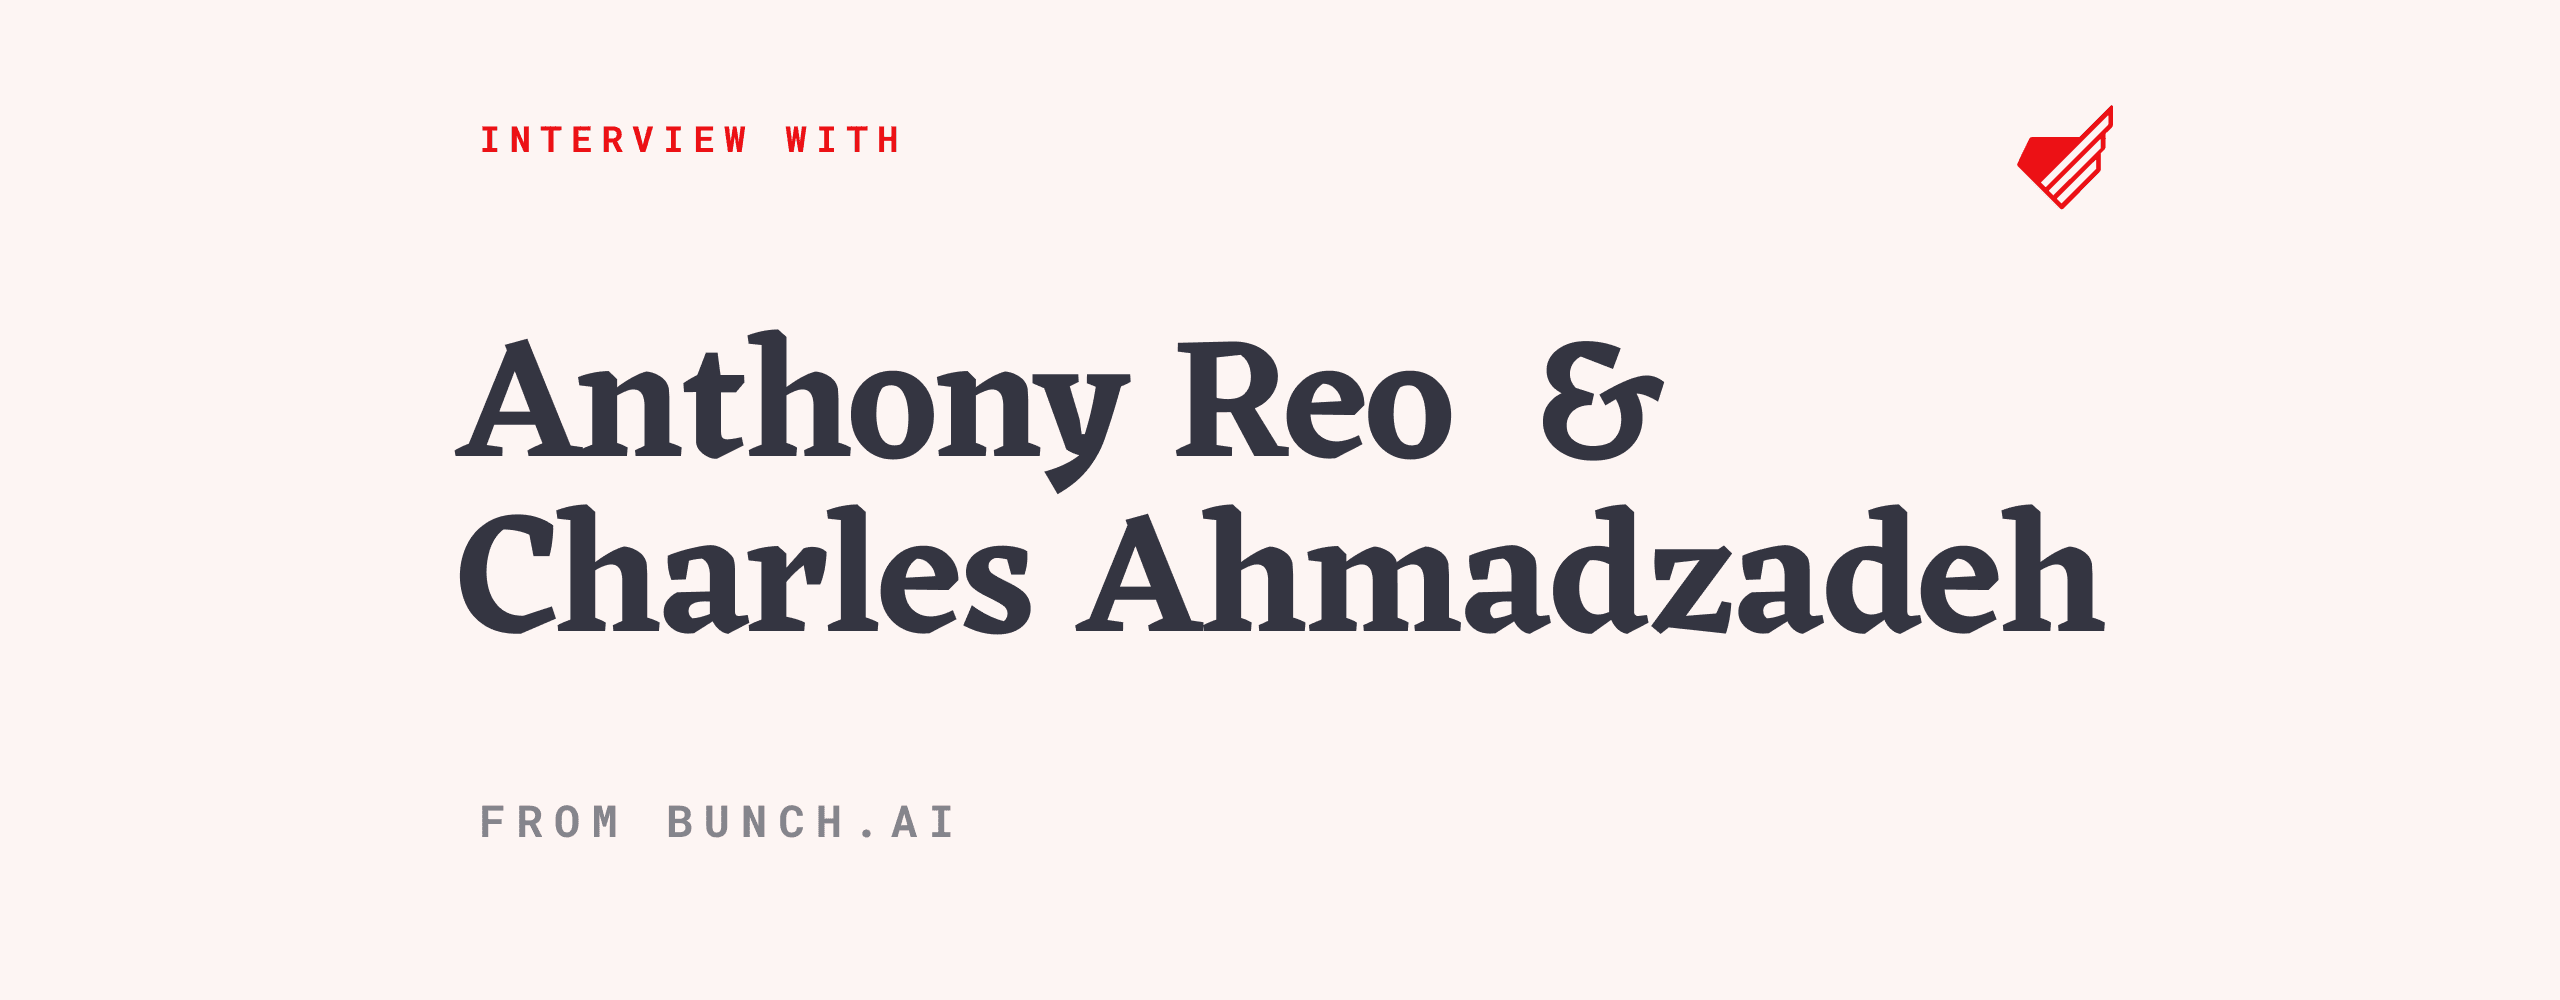 anthony-reo-charles-ahmadzadeh-interview-hs (1)